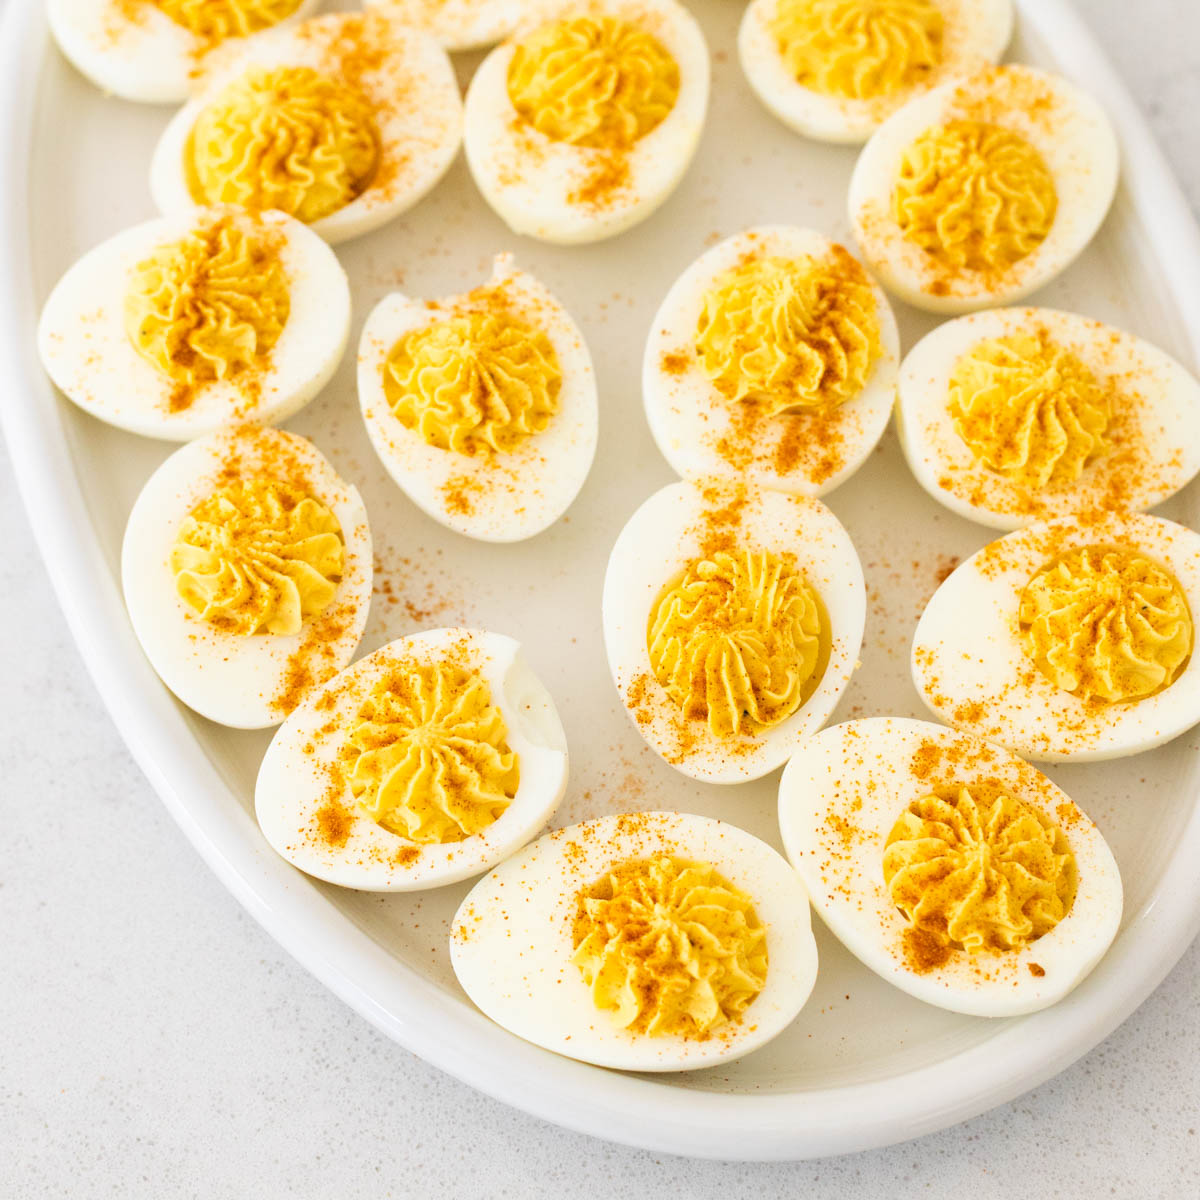 The deviled eggs have been sprinkled with paprika on top.